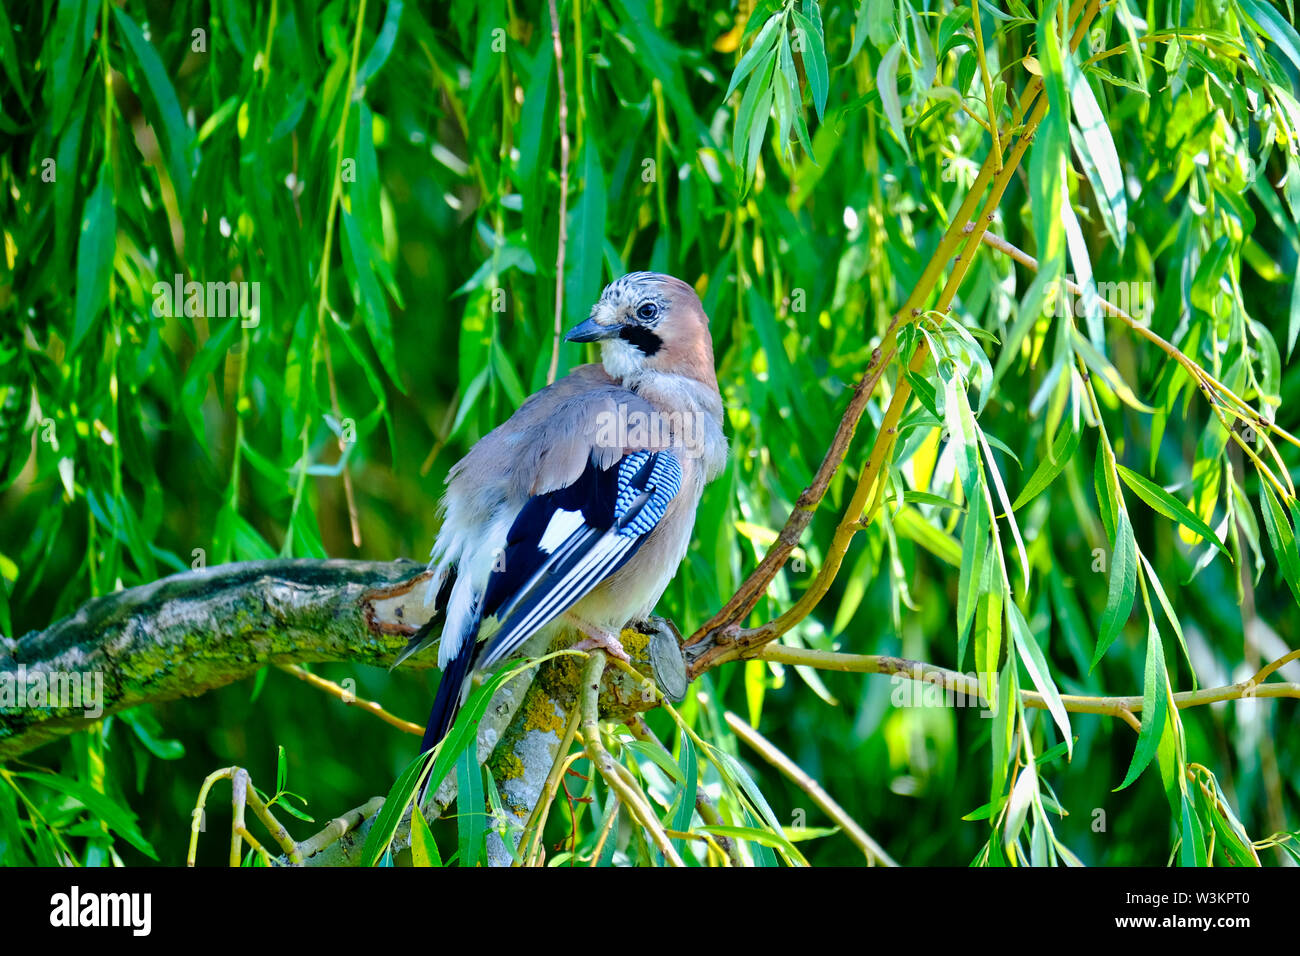 West Sussex, England, UK. Single Eurasian Jay (Garrulus glandarius) perched on the branch of a Weeping Willow (Salix babylonica) Stock Photo